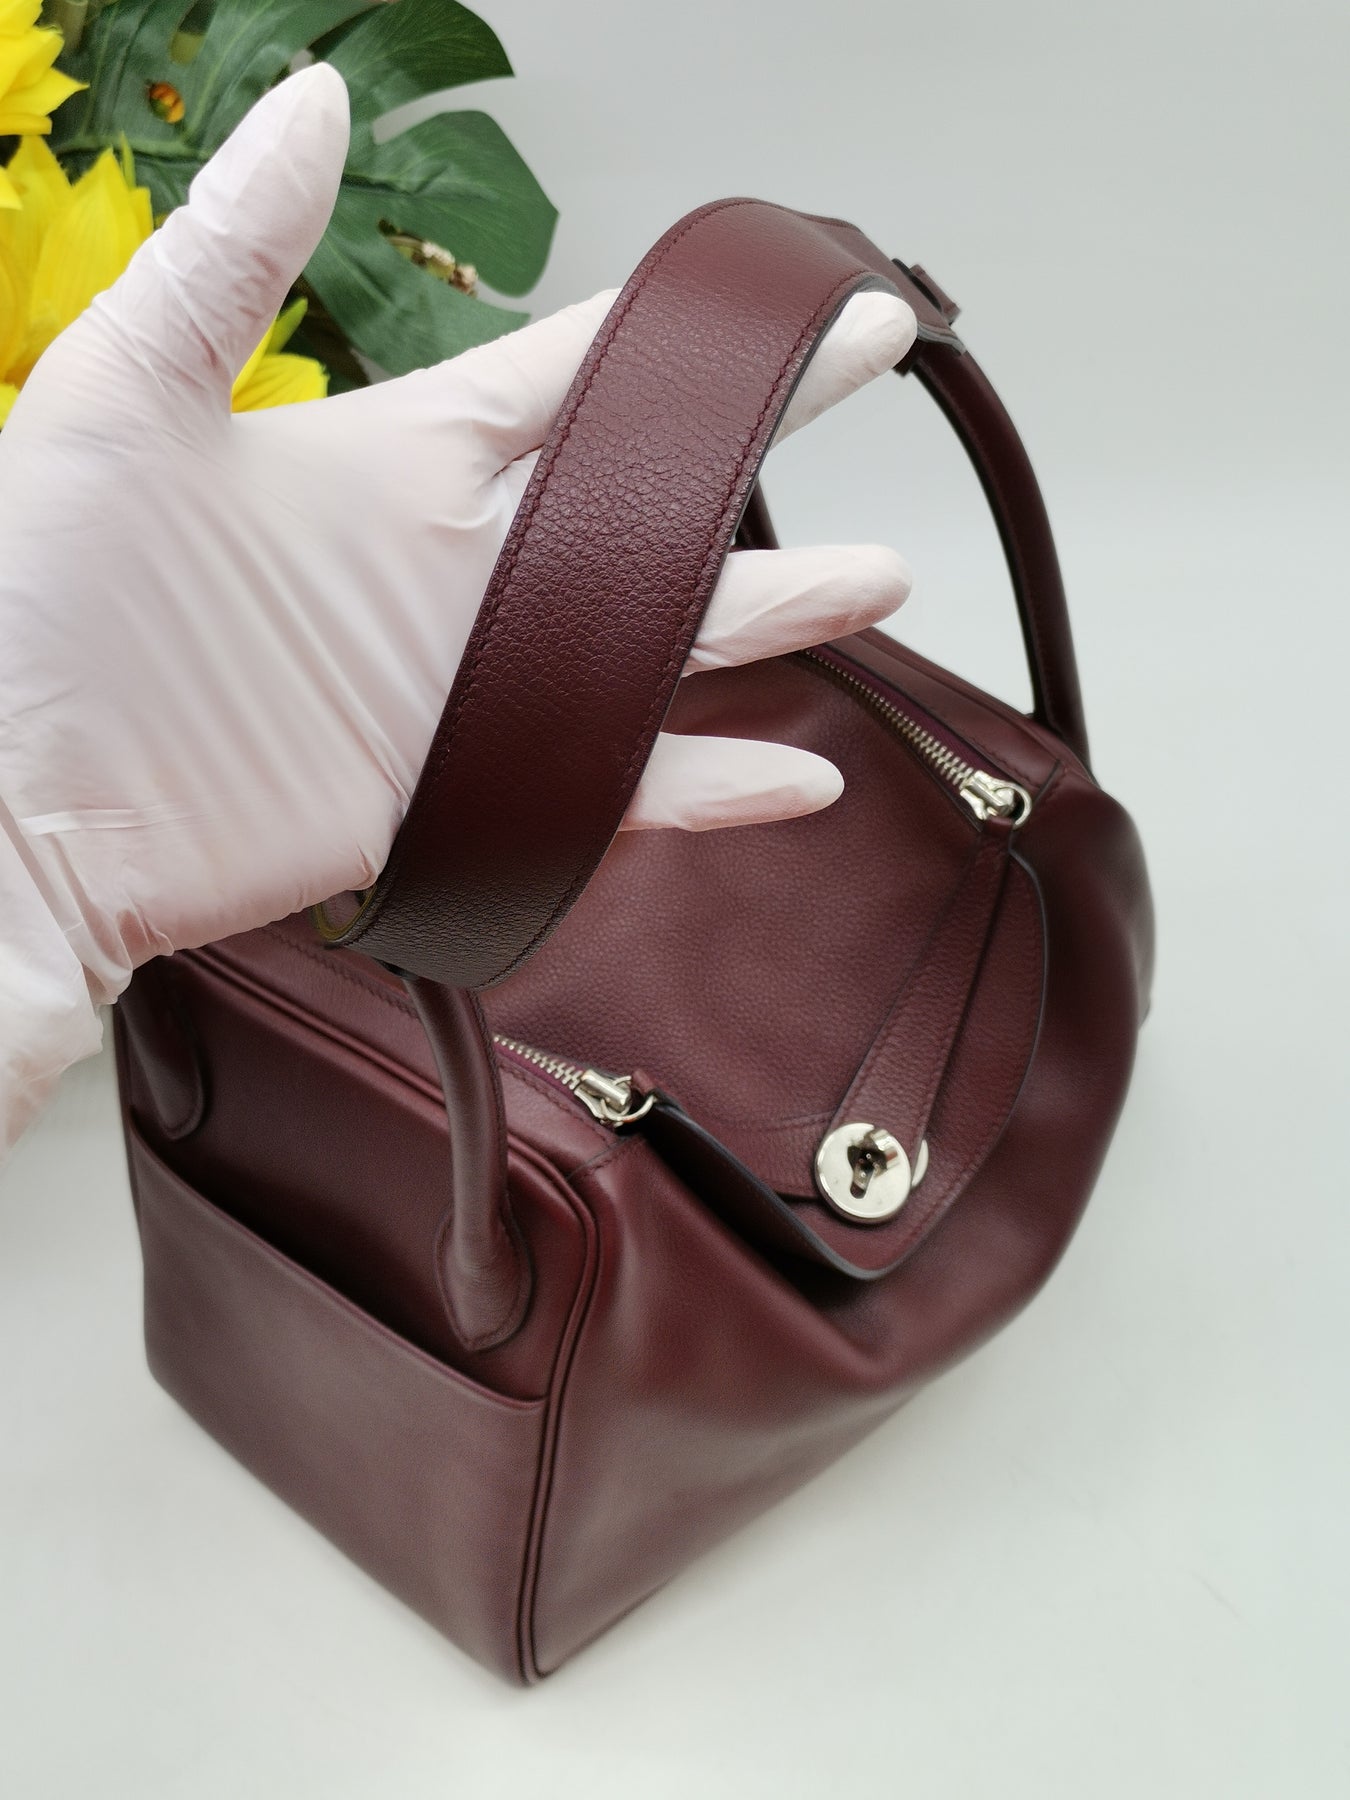 Preowned Authentic Hermes LINDY 26 Veau Evercolor